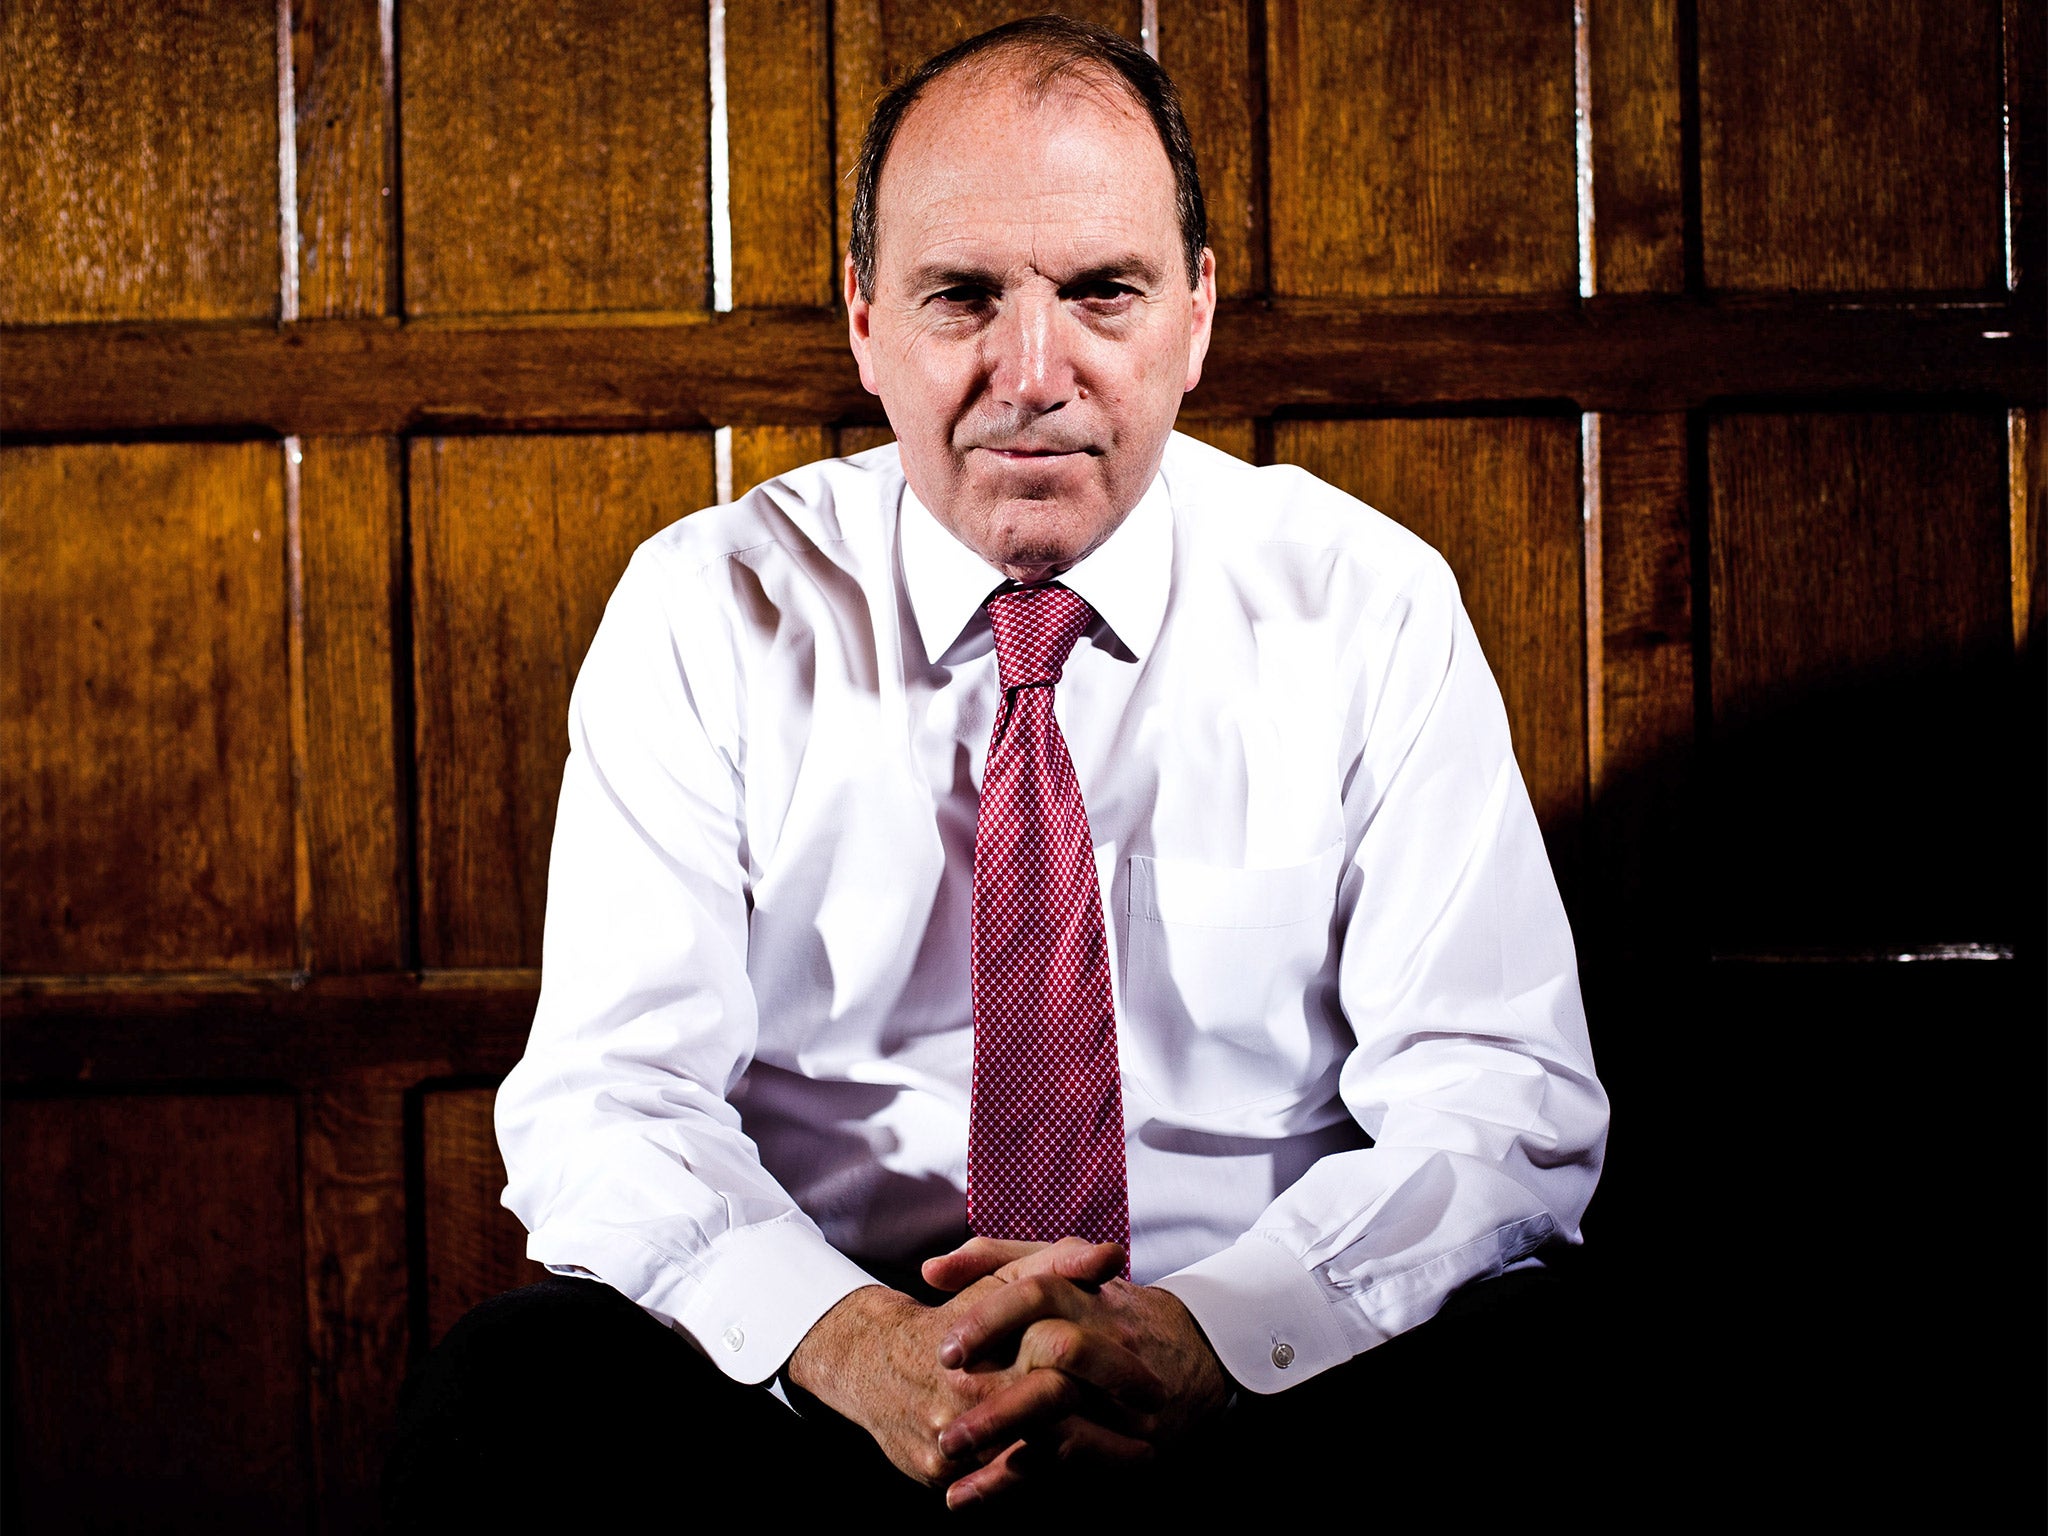 Simon Hughes, who has been at the Ministry of Justice for 11 months, says he has no problem working with Chris Grayling